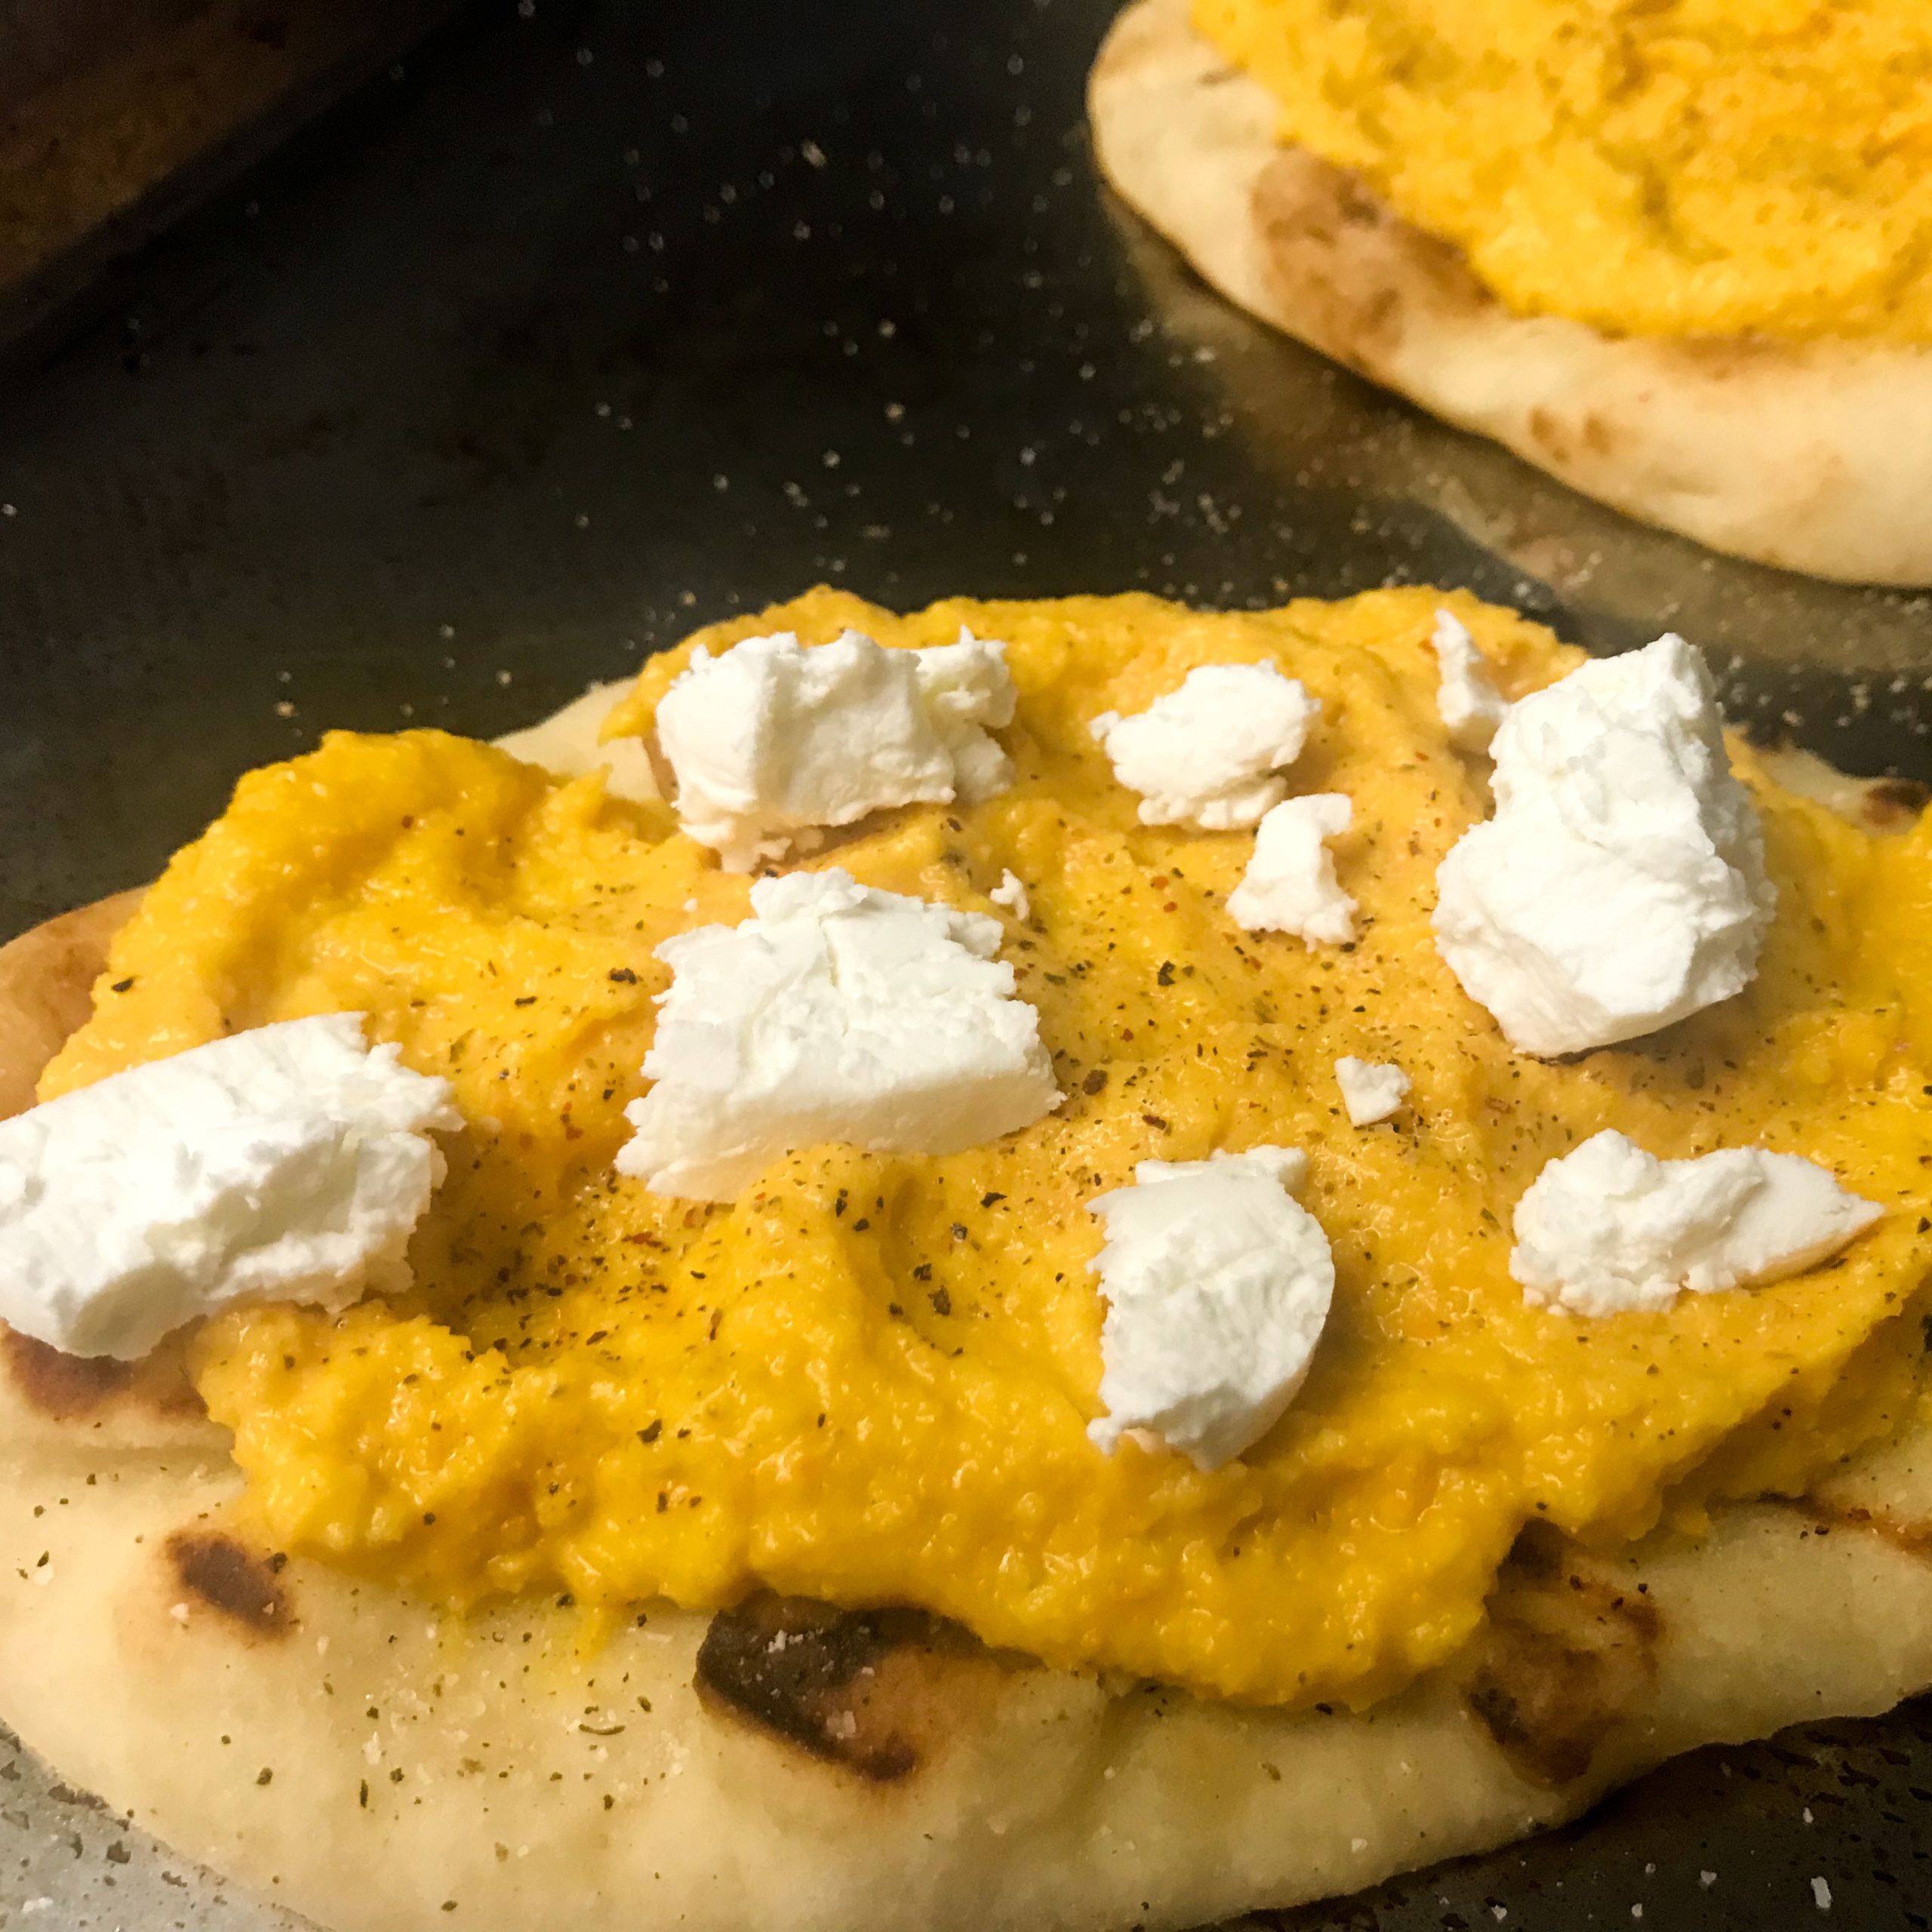 naan bread topped with vandouvan puree and goat cheese